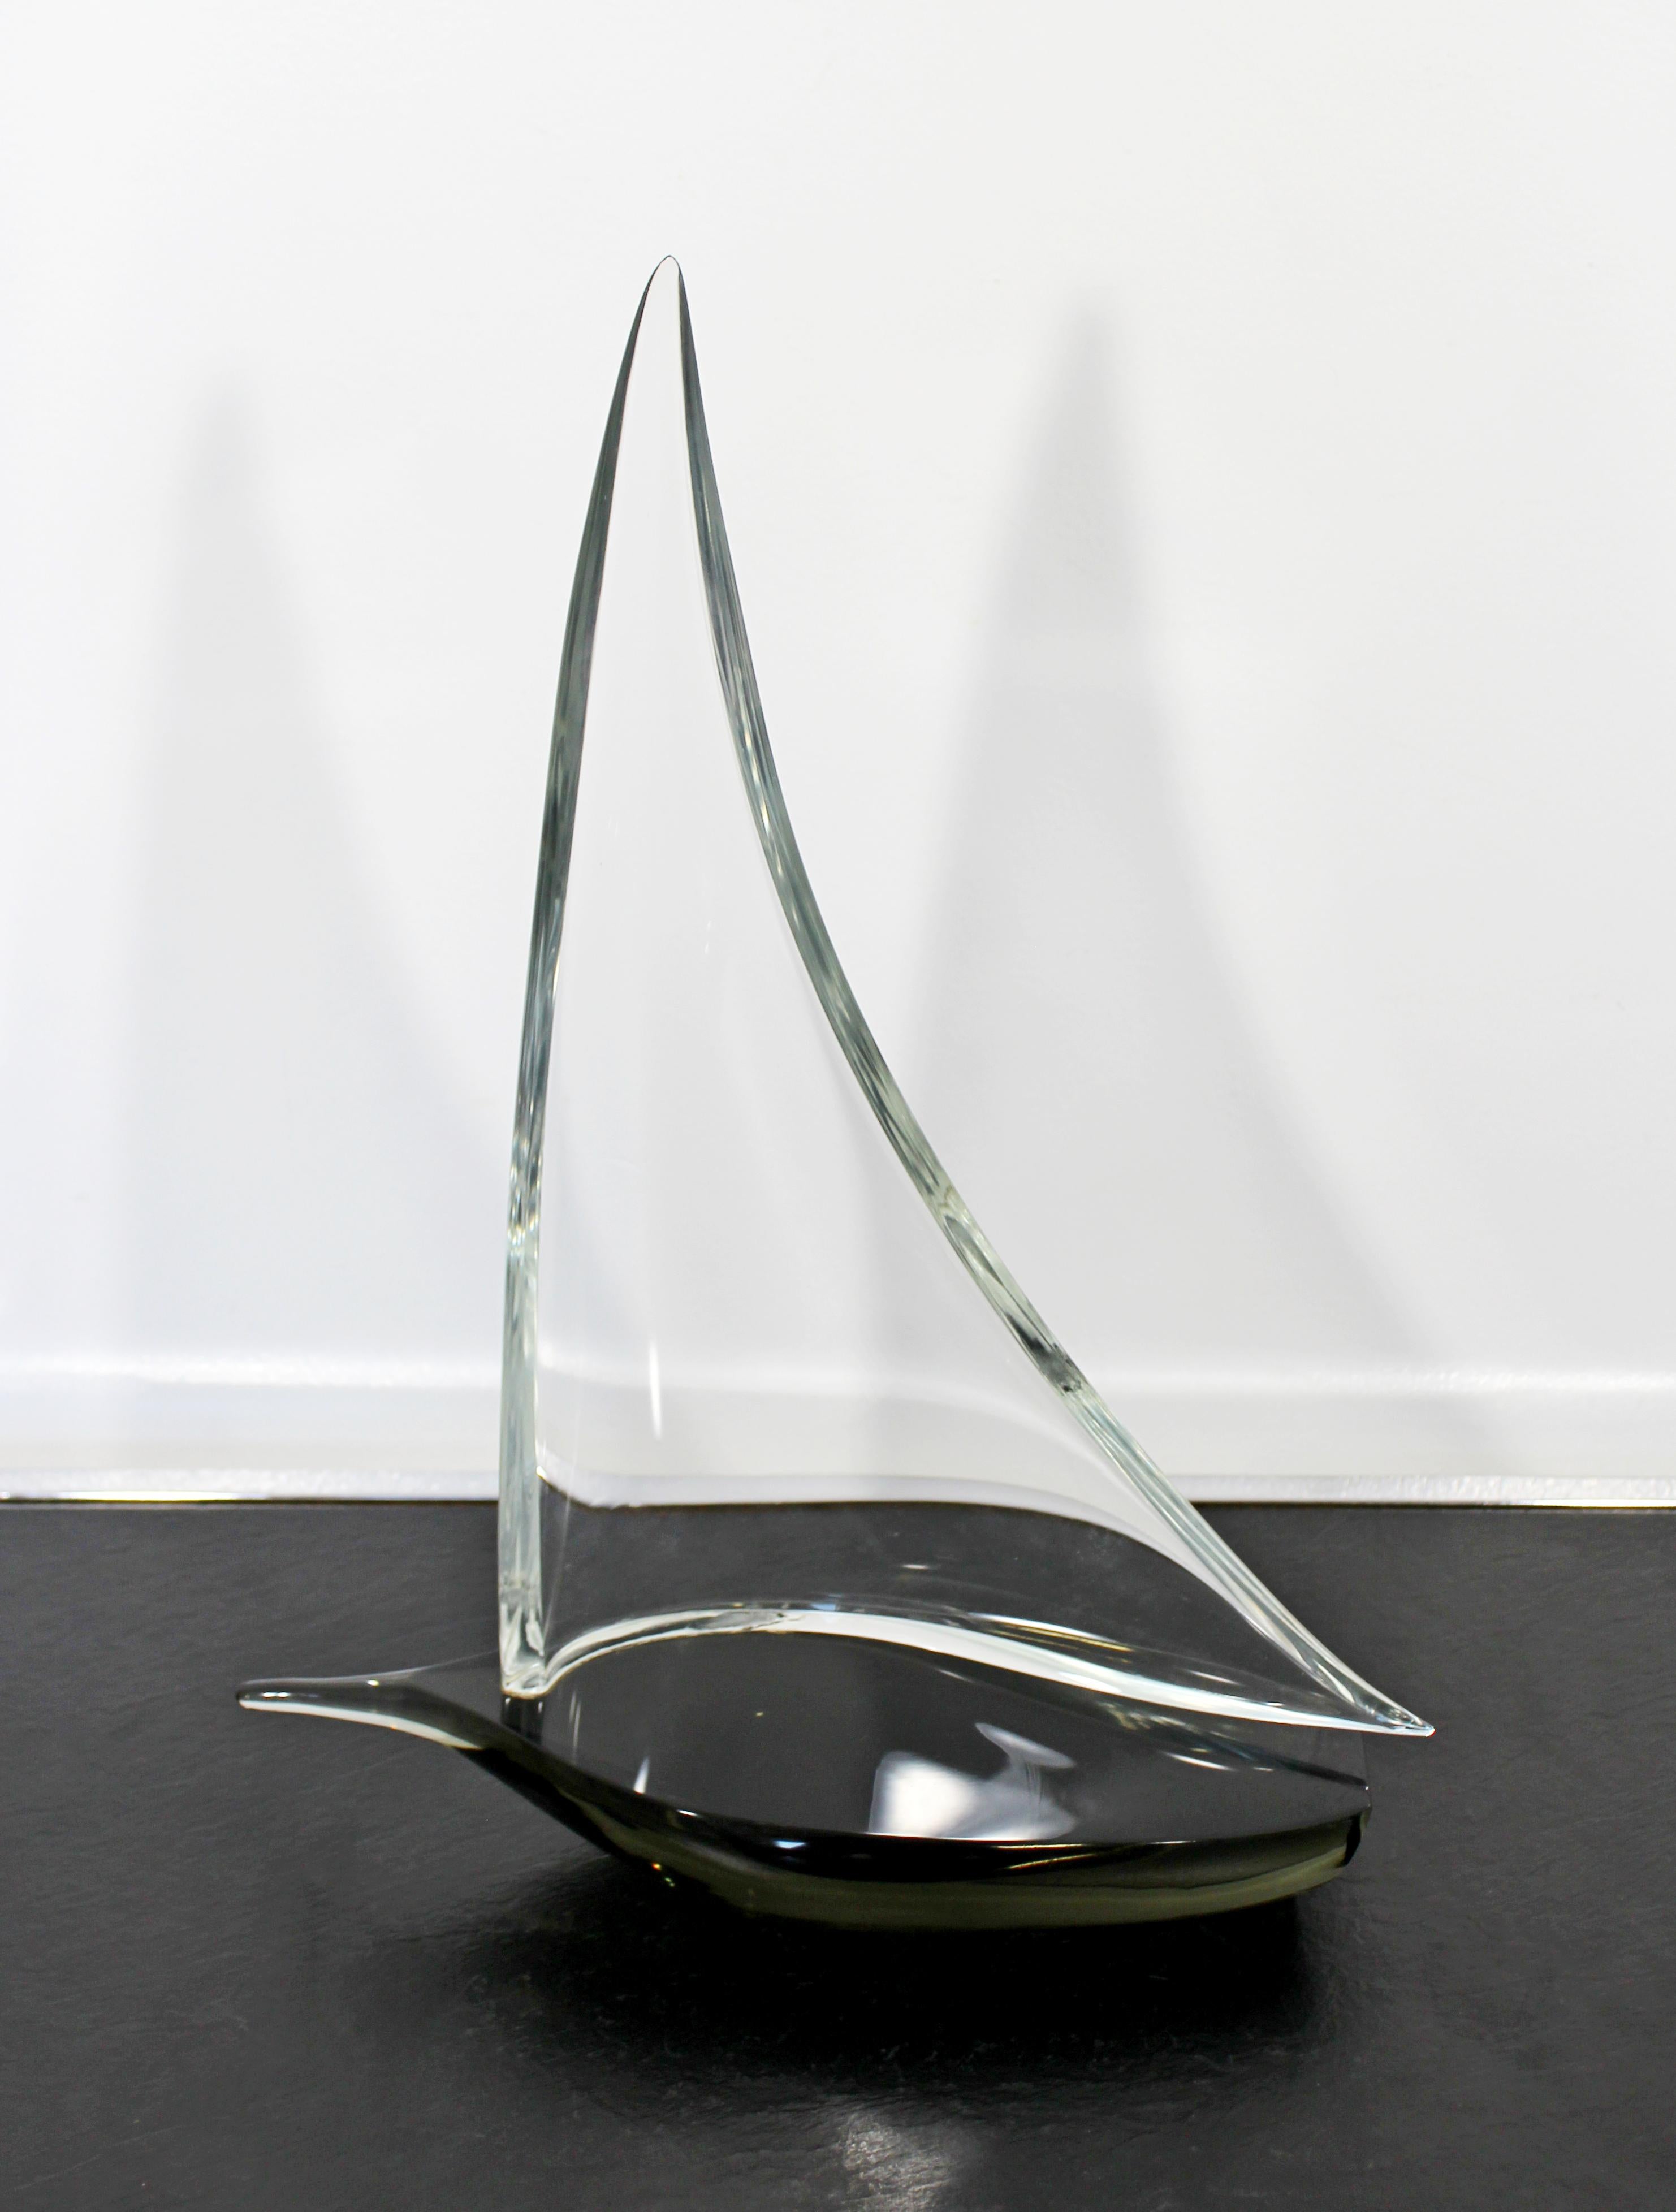 For your consideration is a gorgeous glass art table sculpture of a sailboat, signed Seguso AV. In excellent condition. The dimensions are 13.5